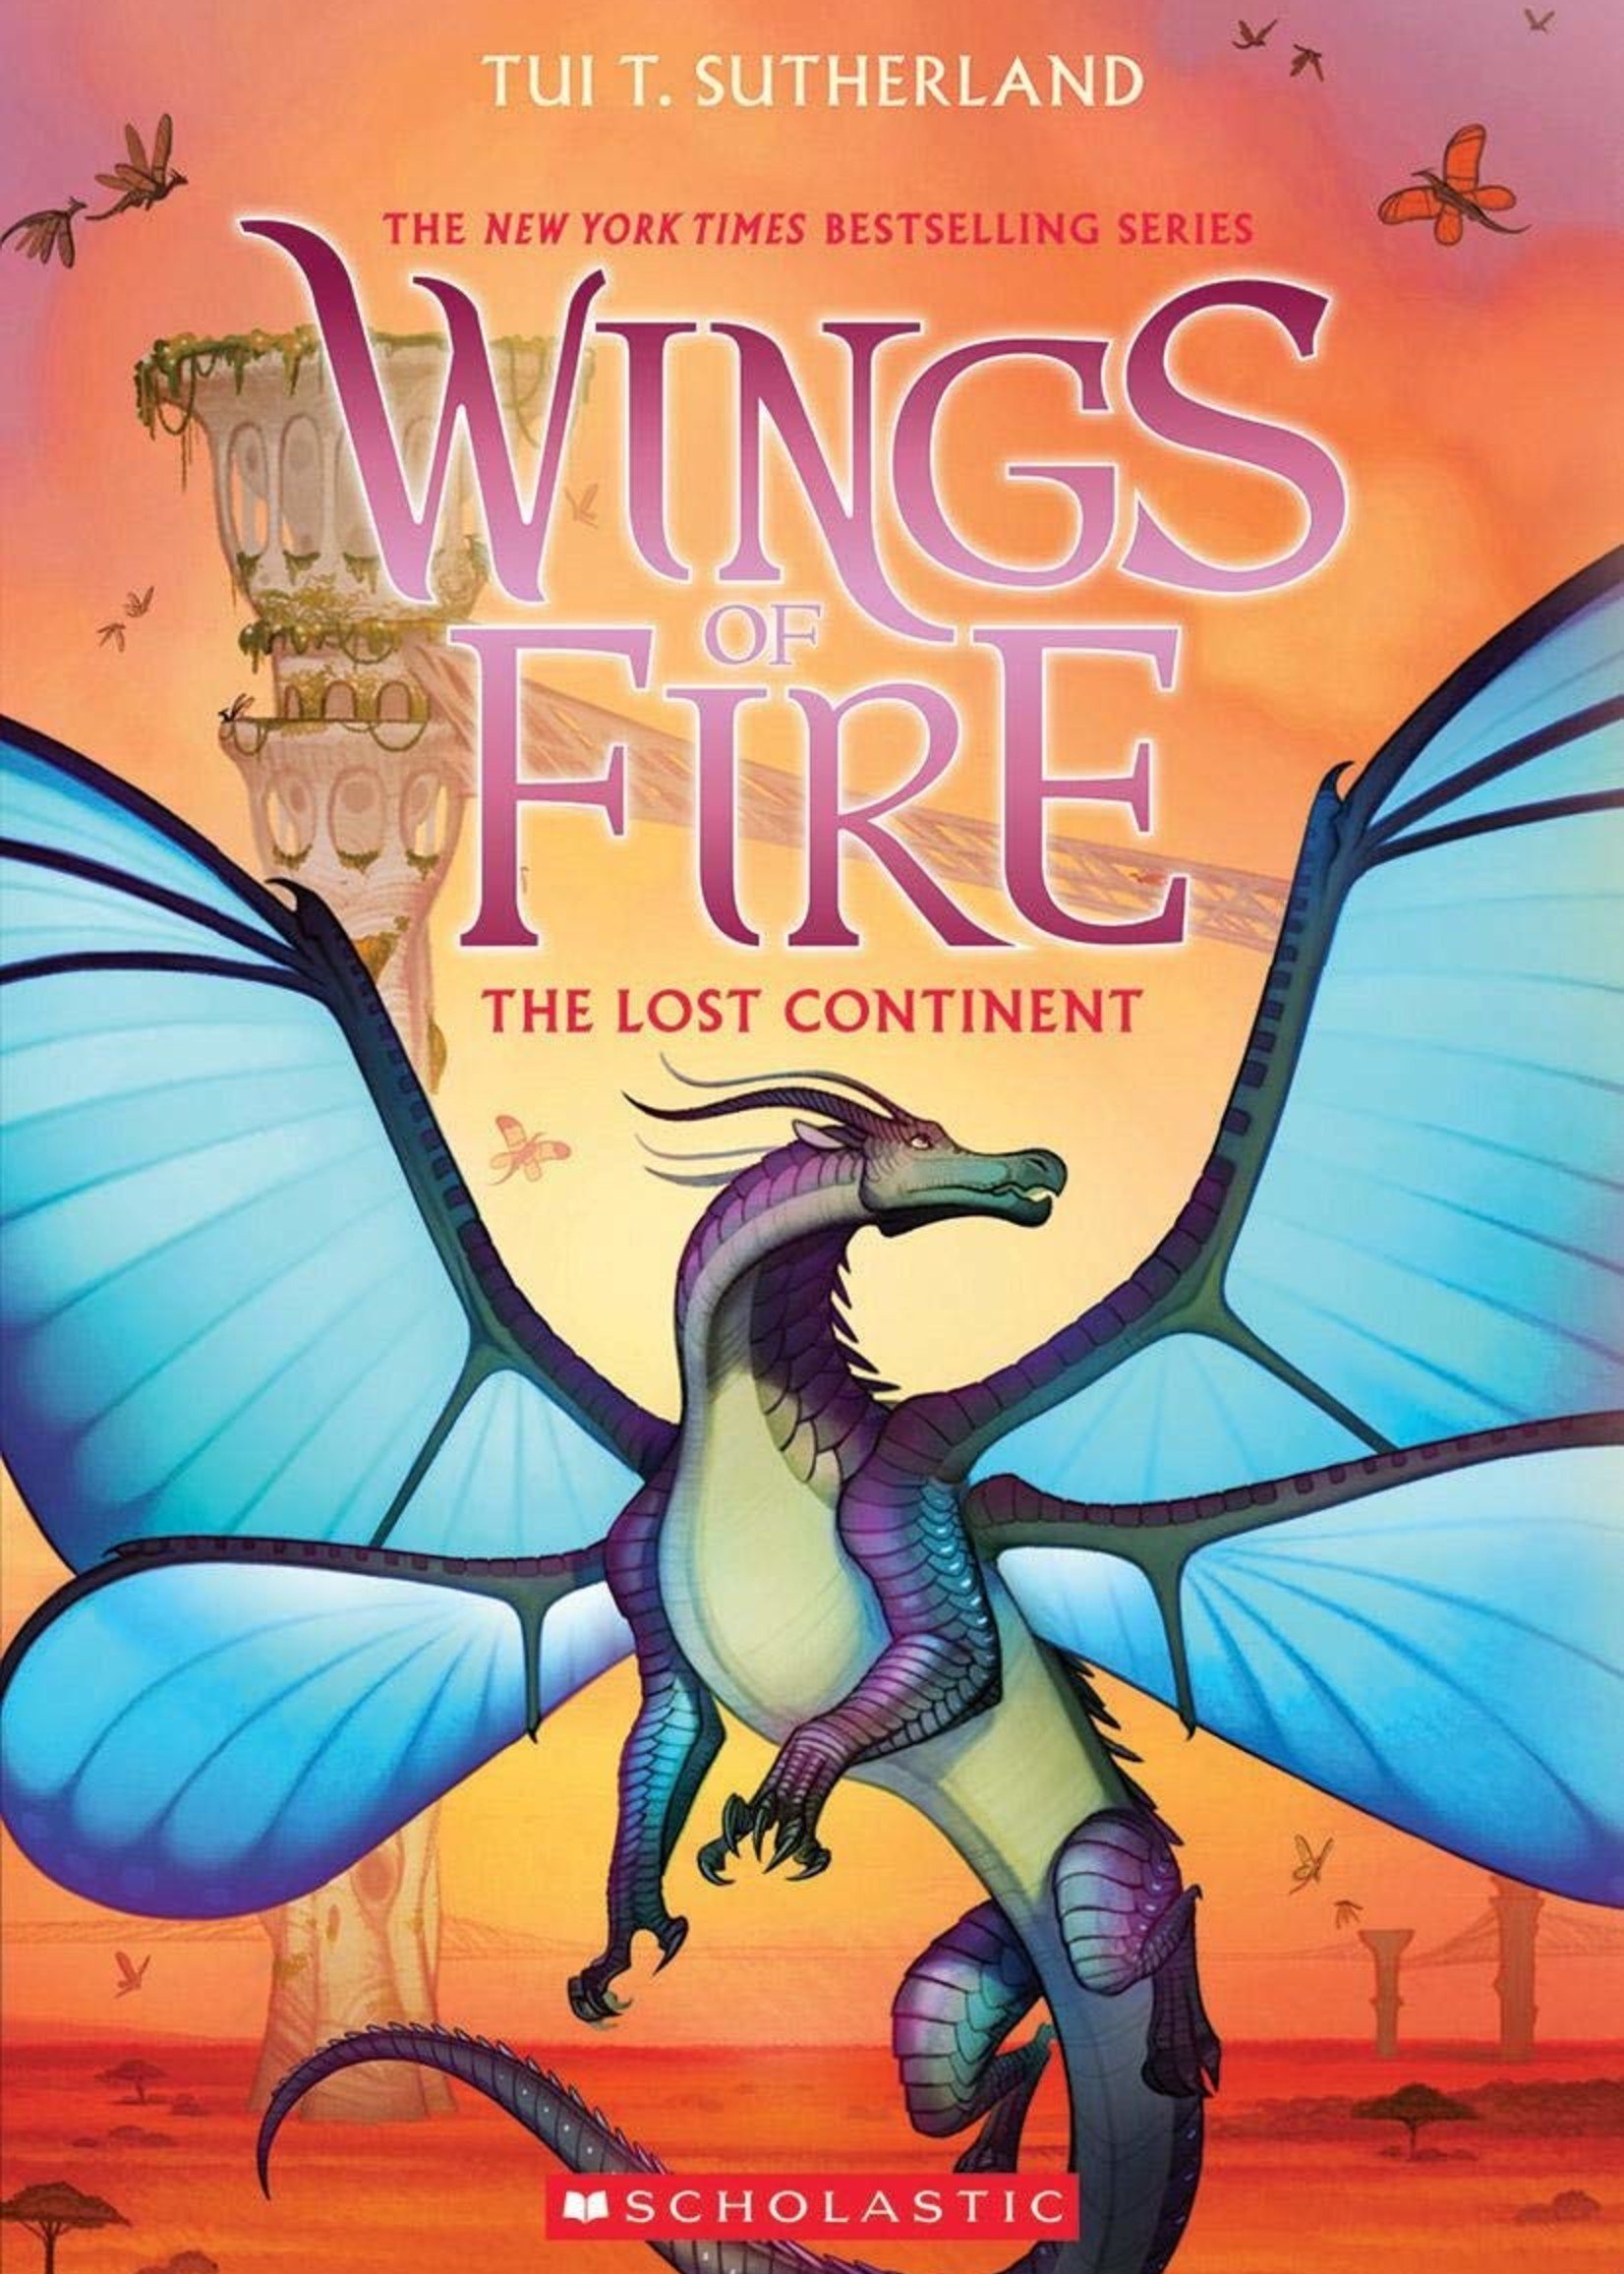 Wings of Fire #11, The Lost Continent - Paperback